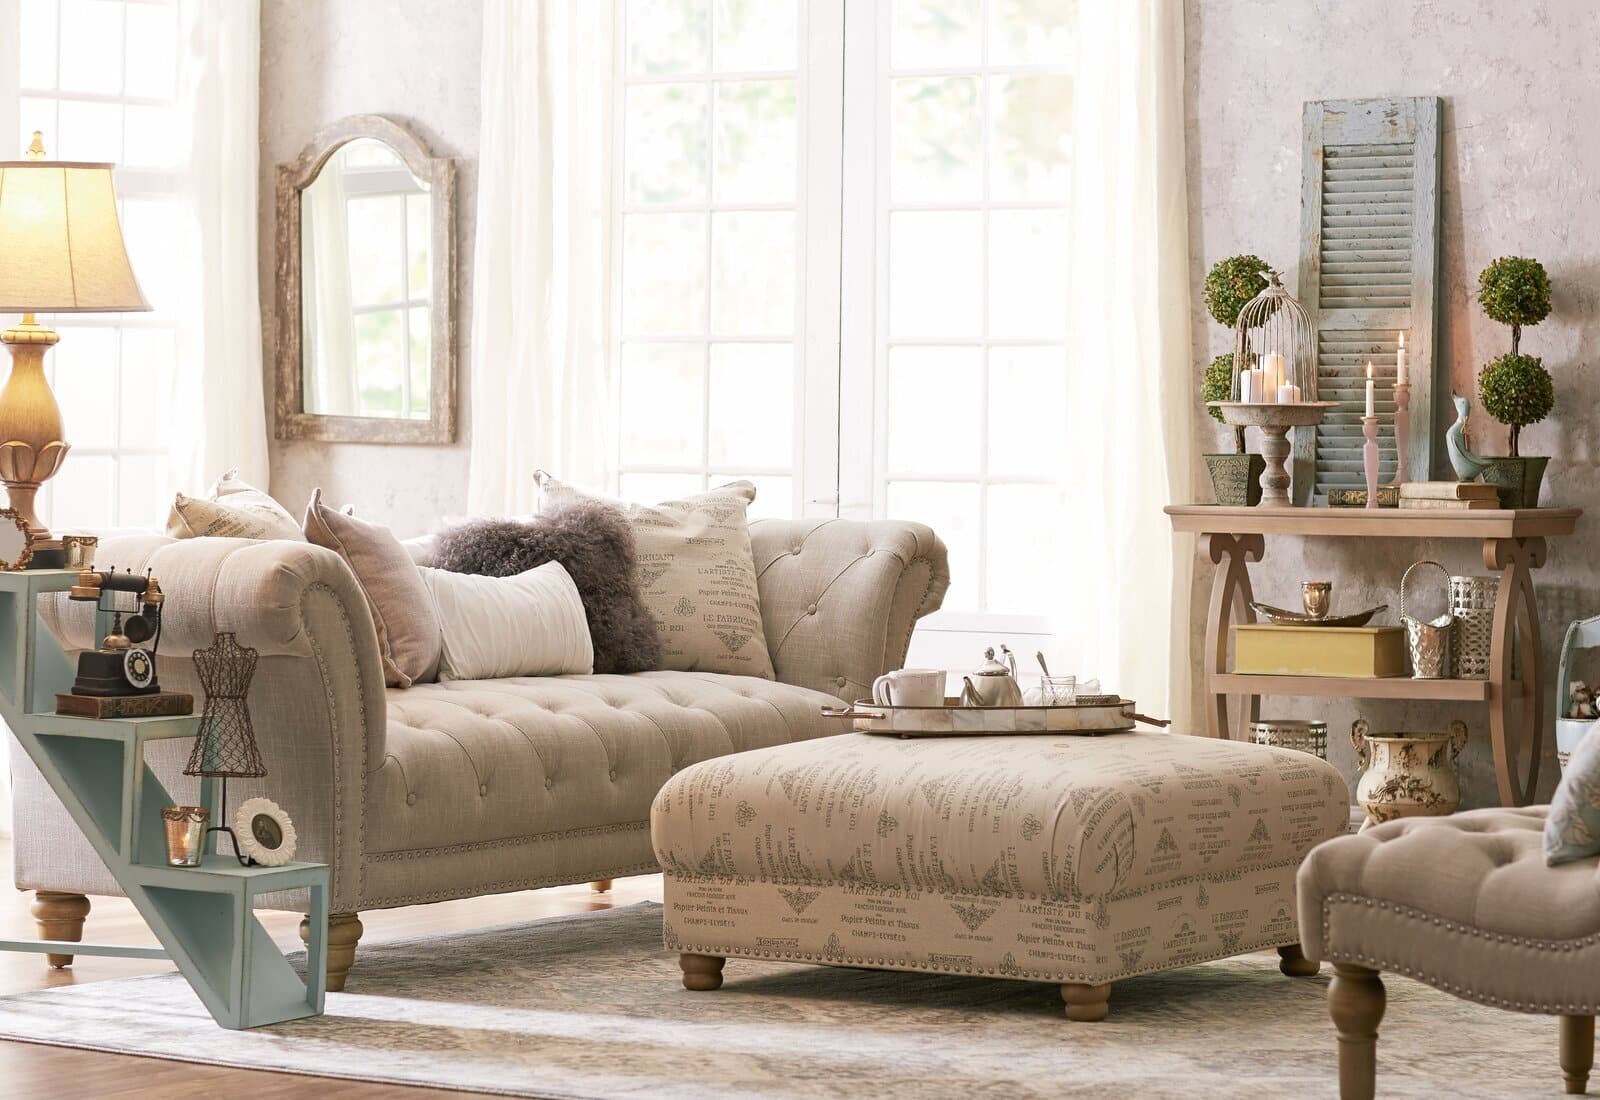 How Durable Are French Country Sofa Fabrics and Structures?